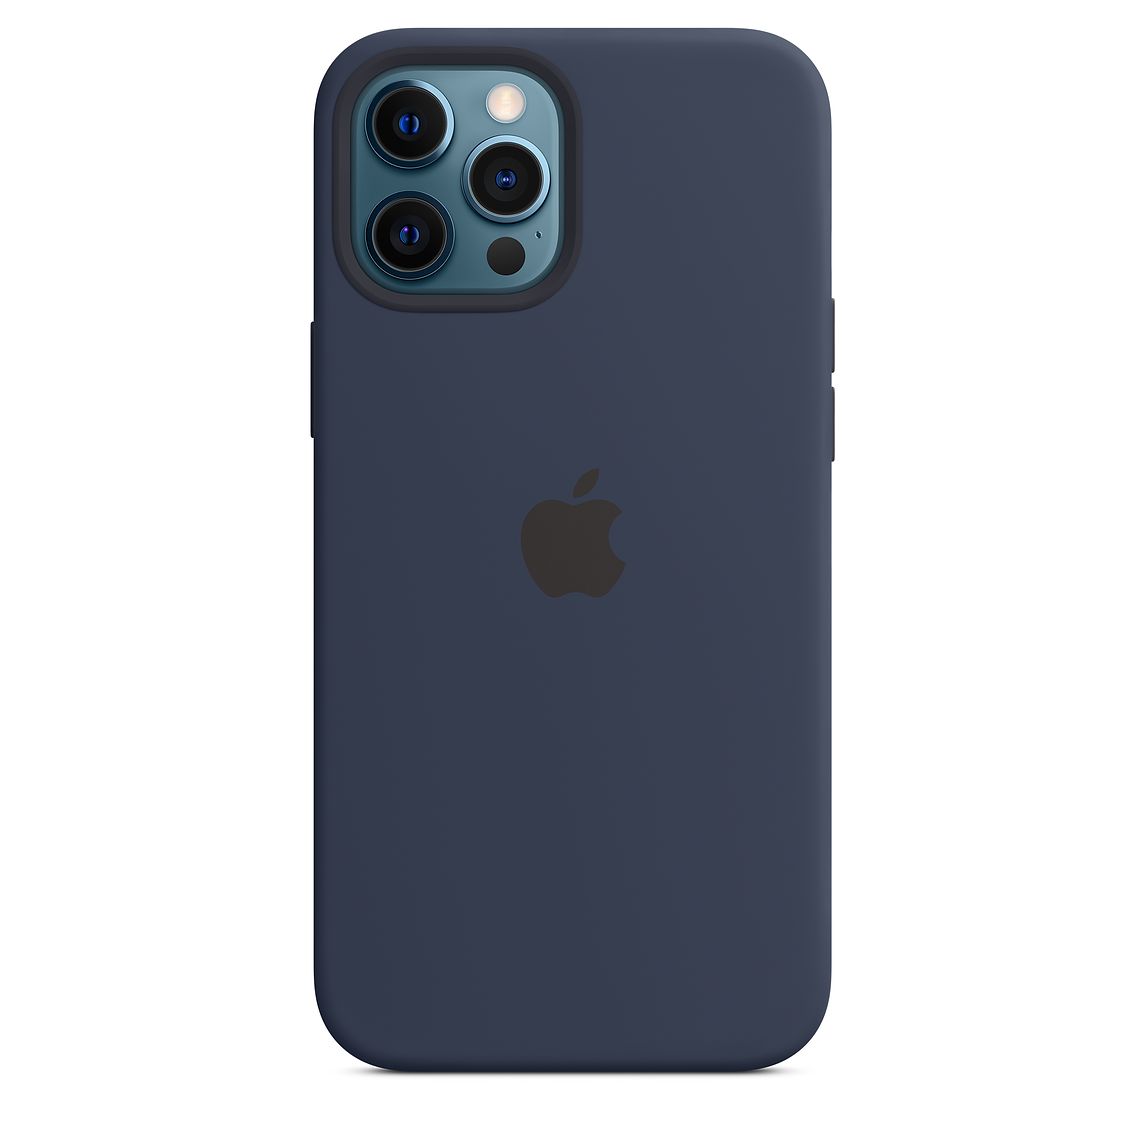 Apple iPhone 12 Pro Max Silicone Case with MagSafe DeepNavy